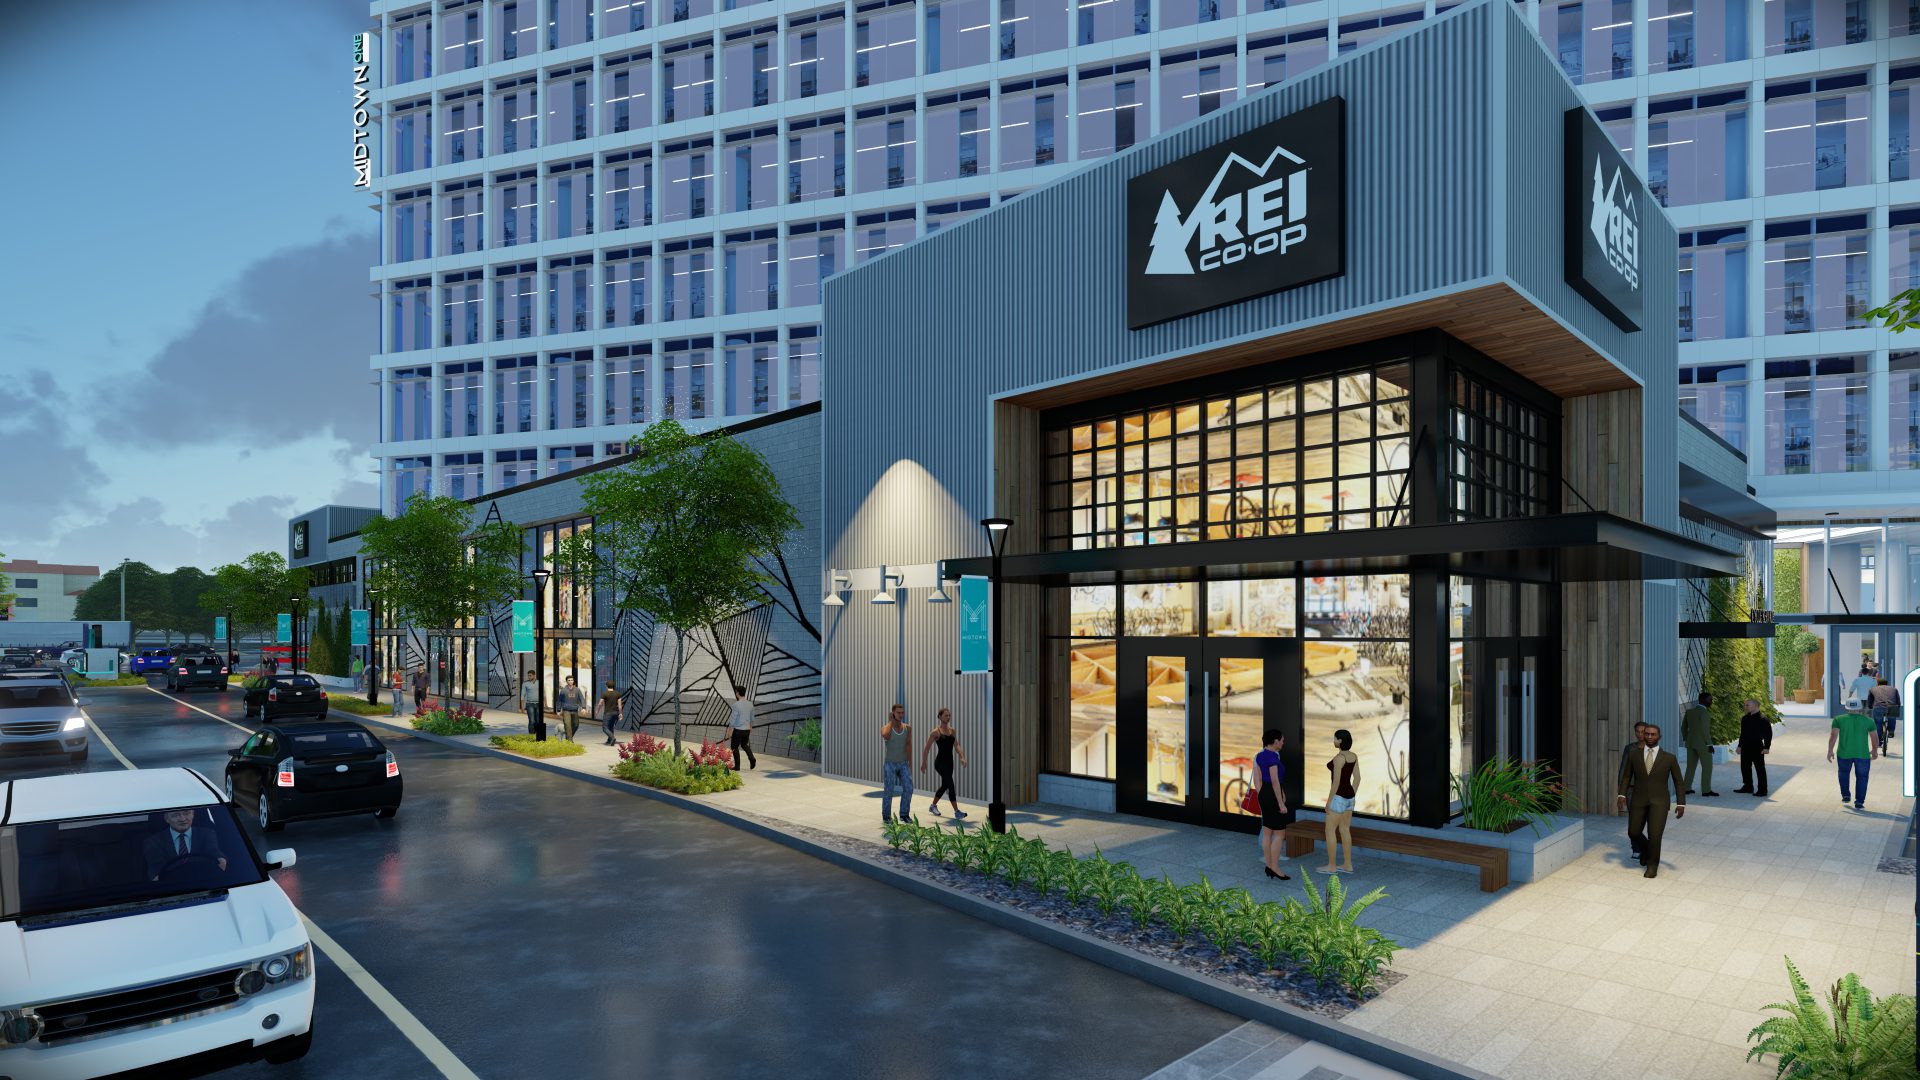 Tampa Bay's first REI store opening Friday at Midtown Tampa